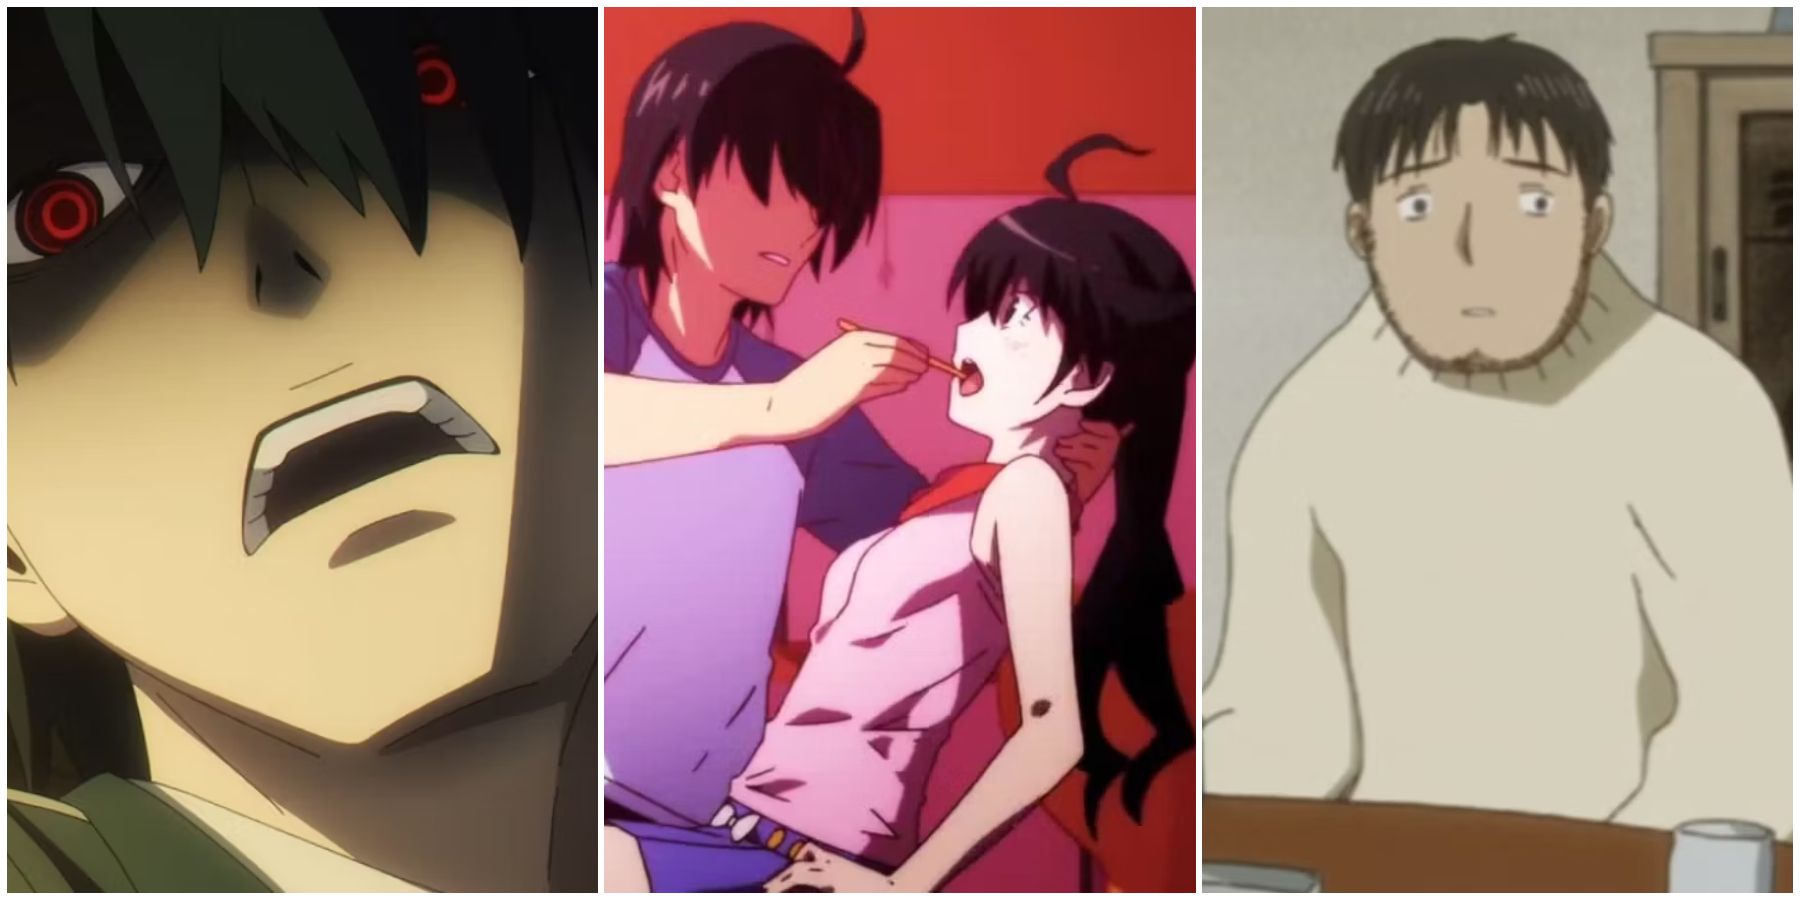 awkward males with sister complex in anime